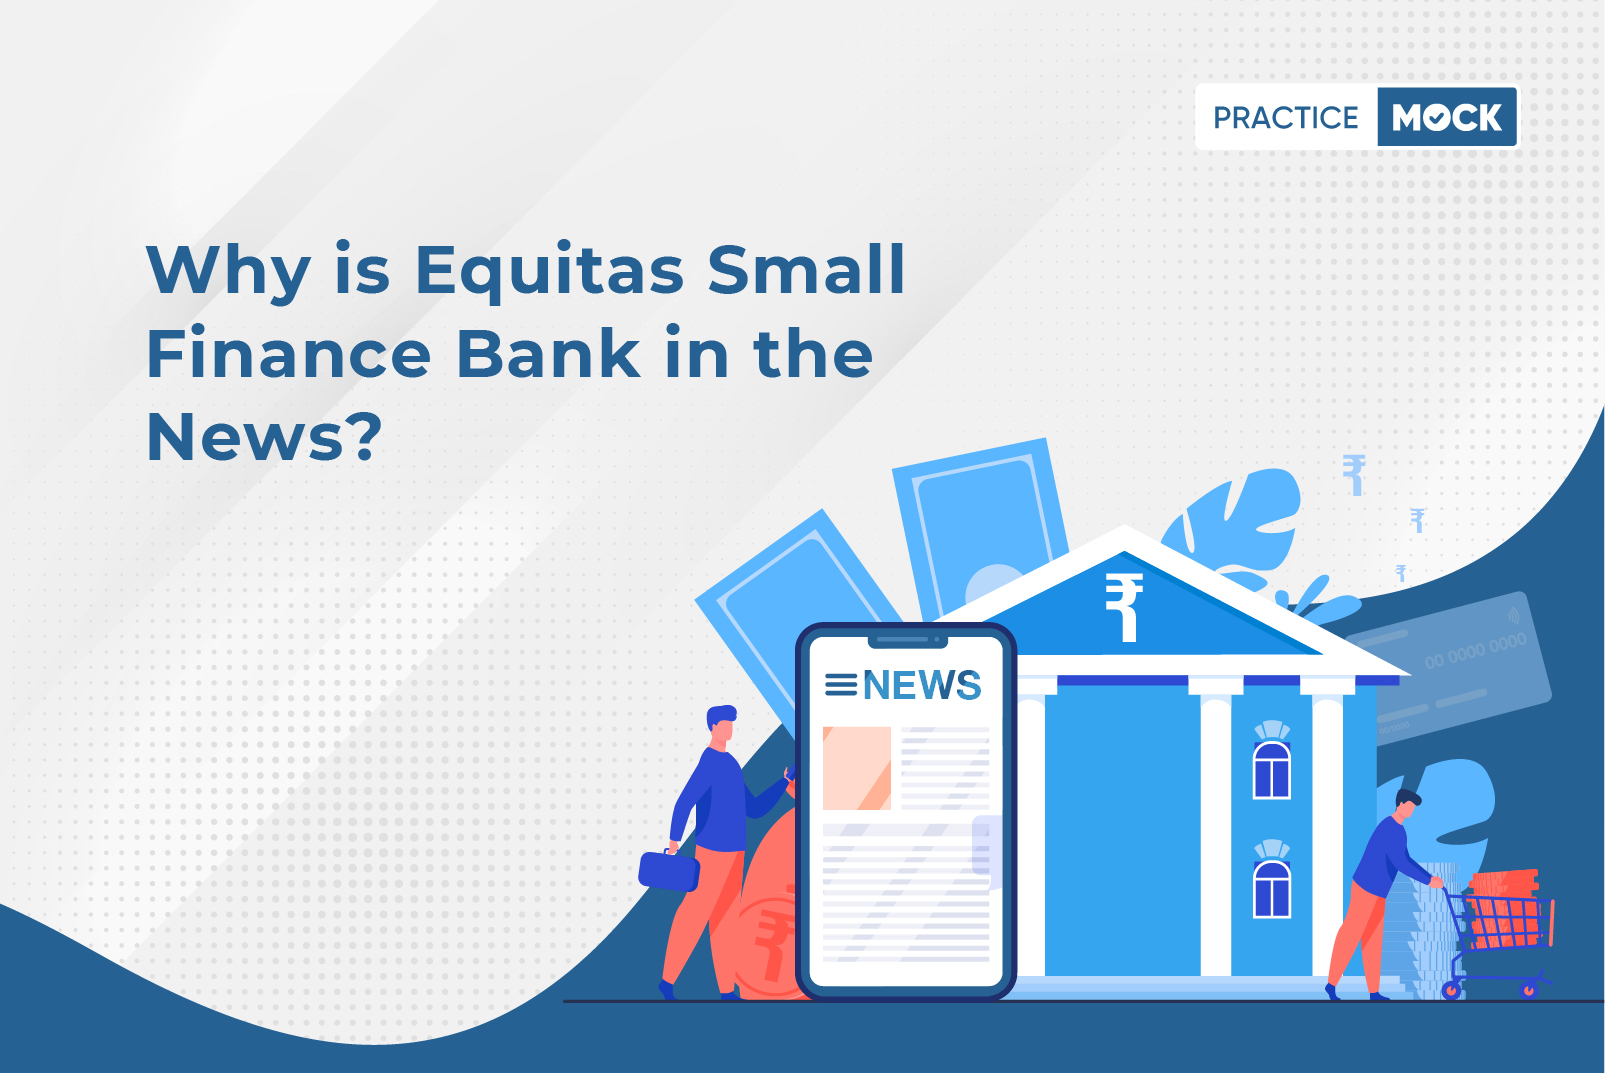 Why is Equitas Small Finance Bank in the news?